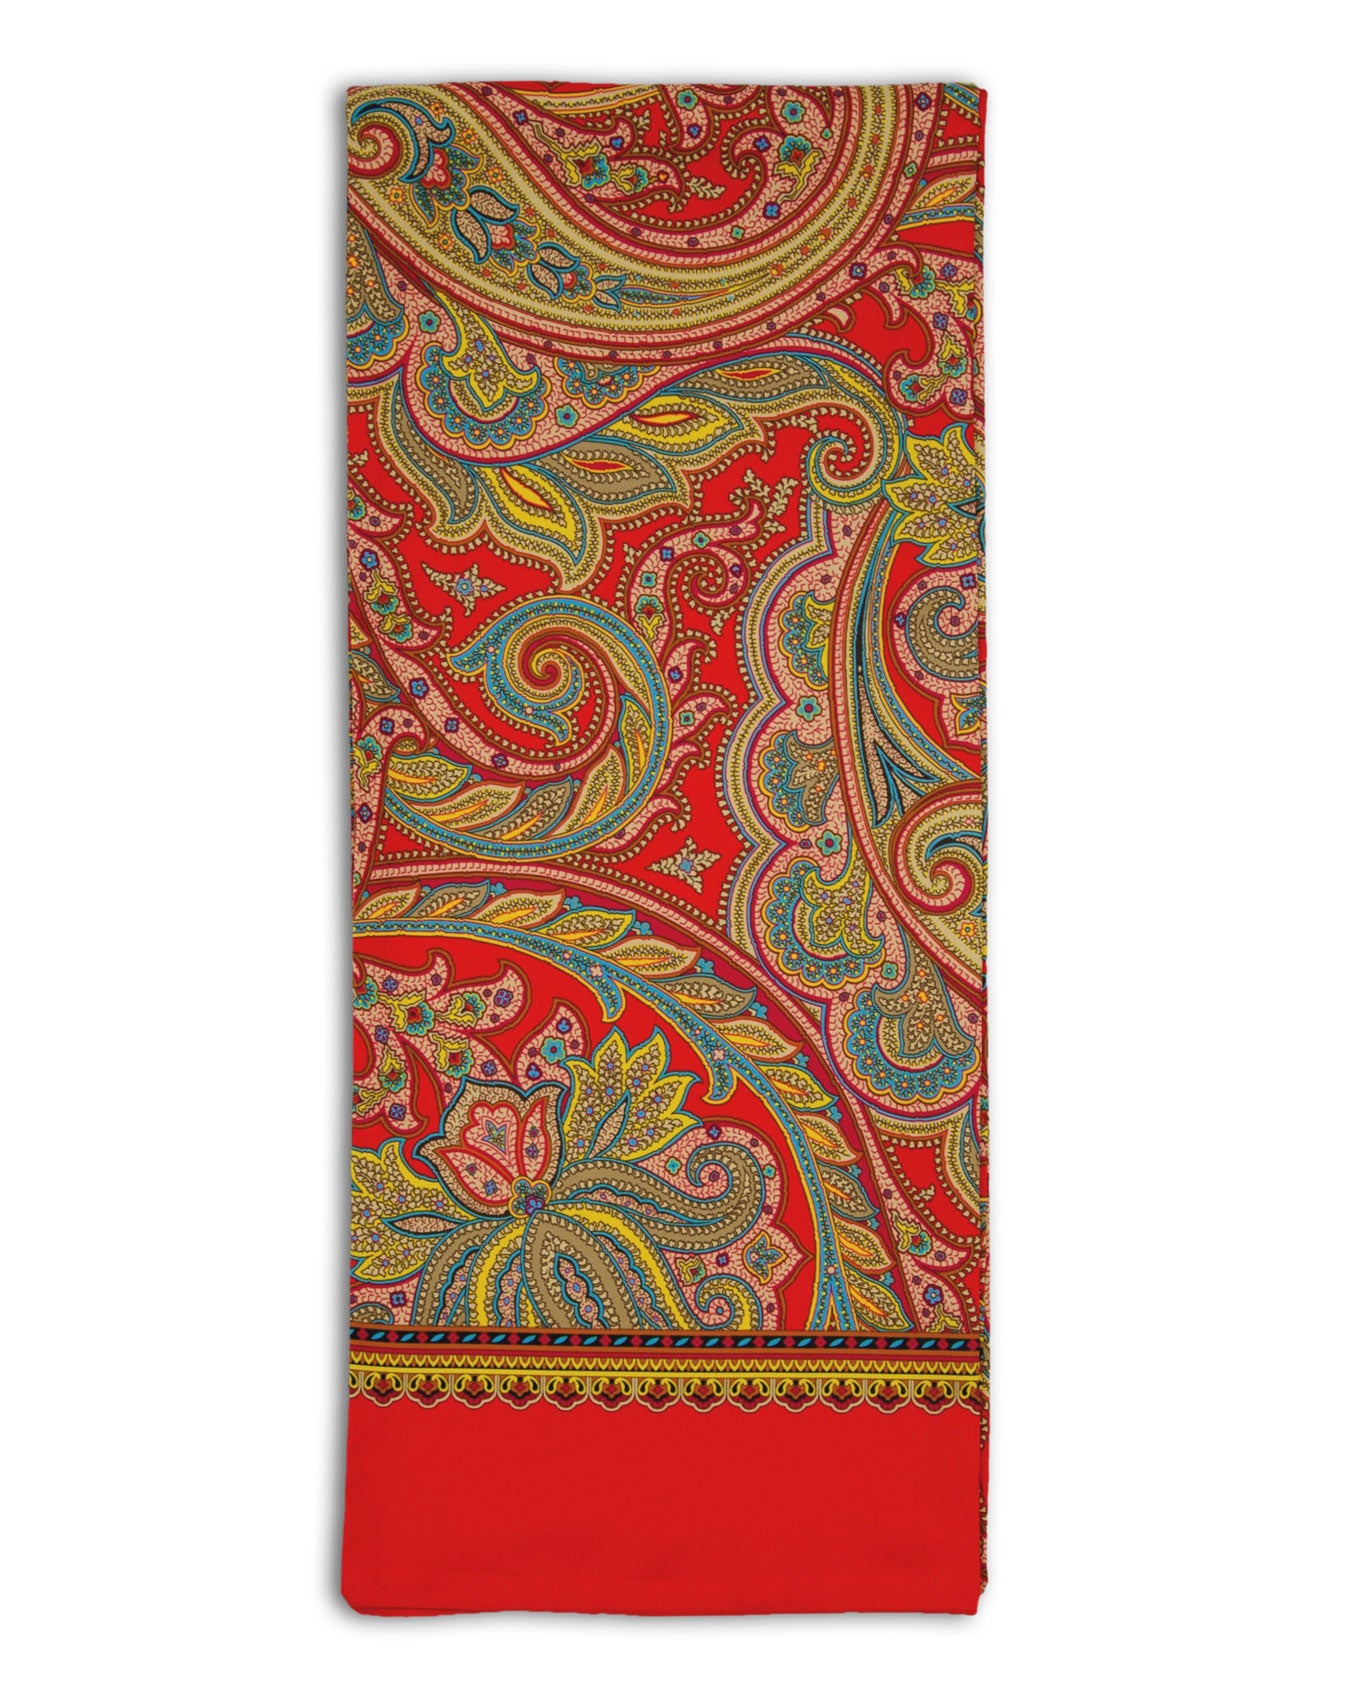 A flat view of 'The Victoria' multicoloured paisley polyester scarf on a rich, red background. Clearly showing the blue, gold and pink paisley patterns and the ornate, decorative border.